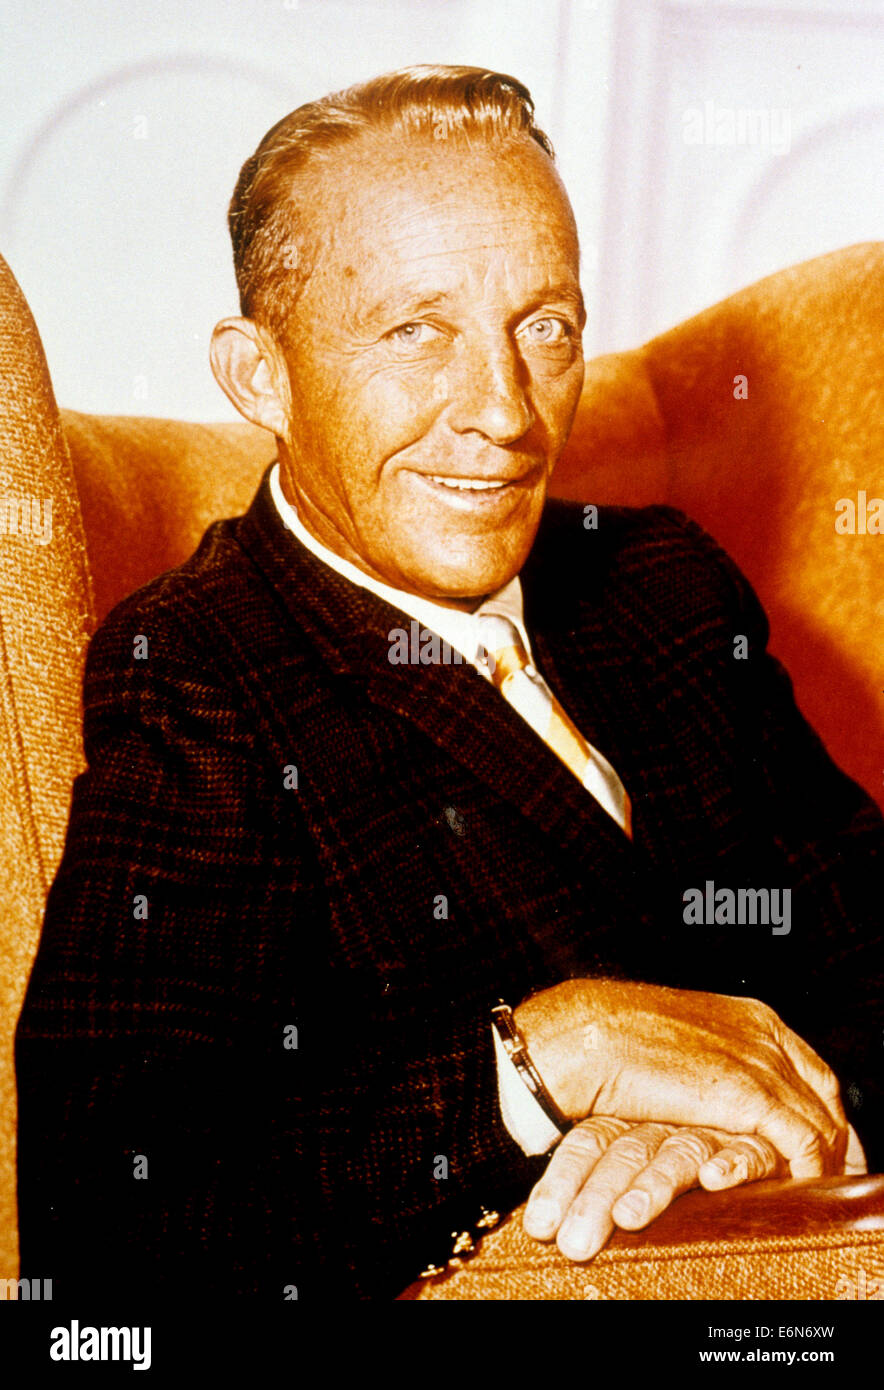 BING CROSBY (1903-1977) US singer and actor about 1945 Stock Photo